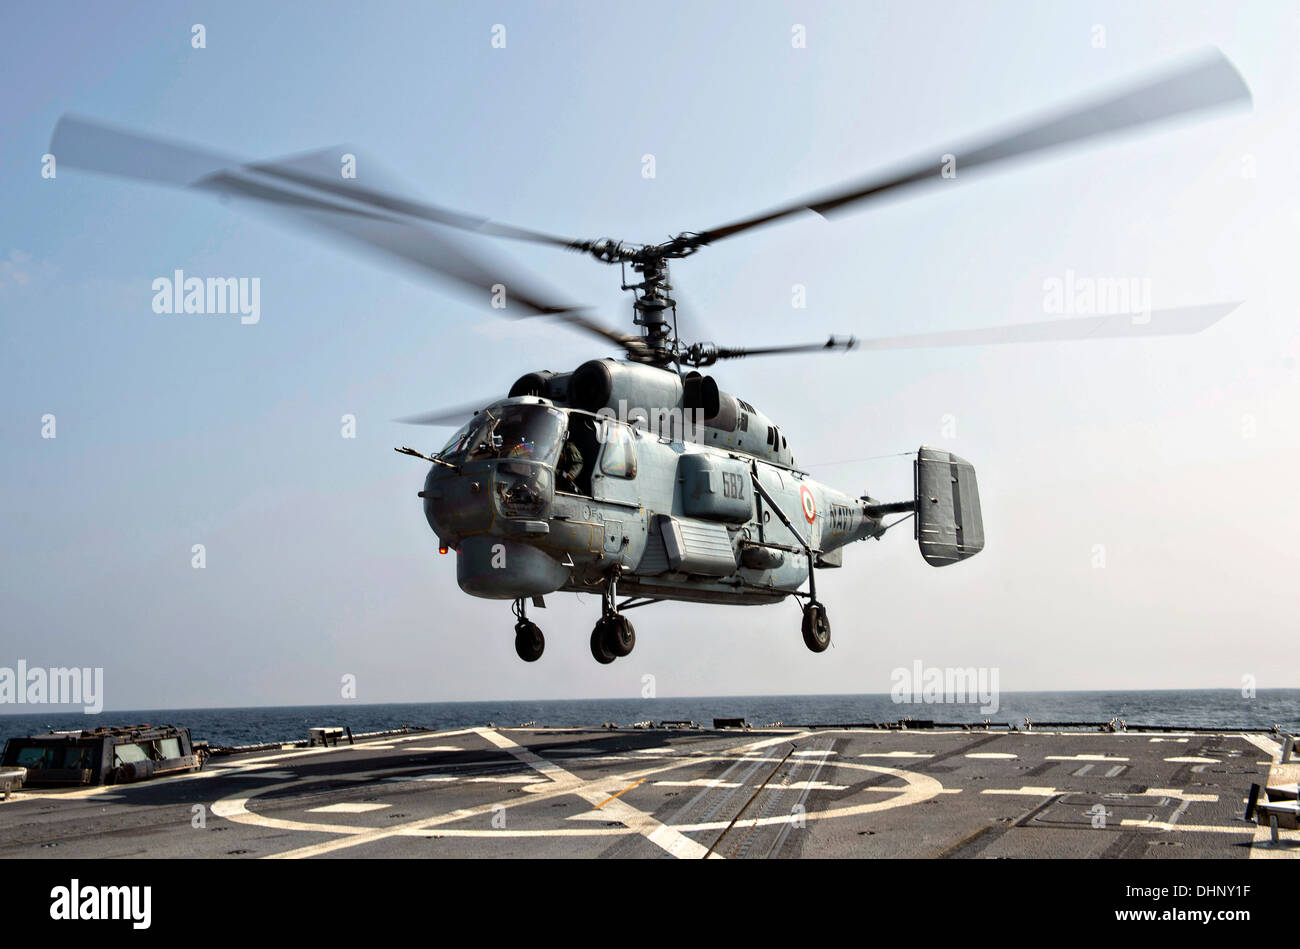 An Indian Navy KV-28 Helix helicopter lands on the flight deck of the Arleigh Burke-class guided-missile destroyer USS McCampbell during exercise Malabar November 7, 2013 operating in the Bay of Bengal. Stock Photo